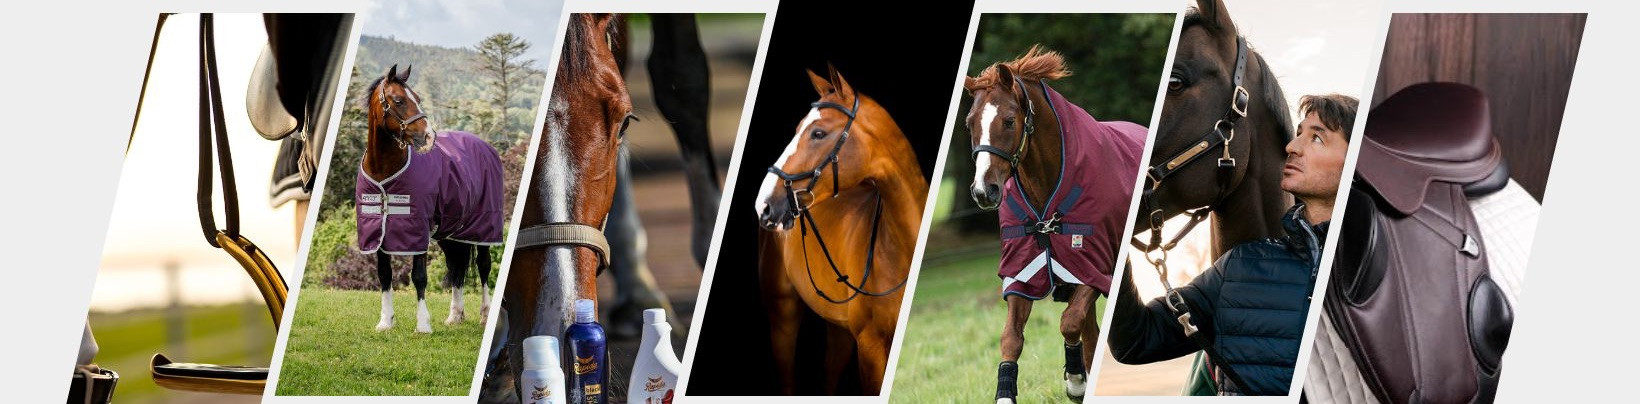 equestrian equipment, Races and castings, Horse equipment, insect protection, Maintenance equipment, Feed, feed additives, Buckets, the stables, saddles and saddle belts